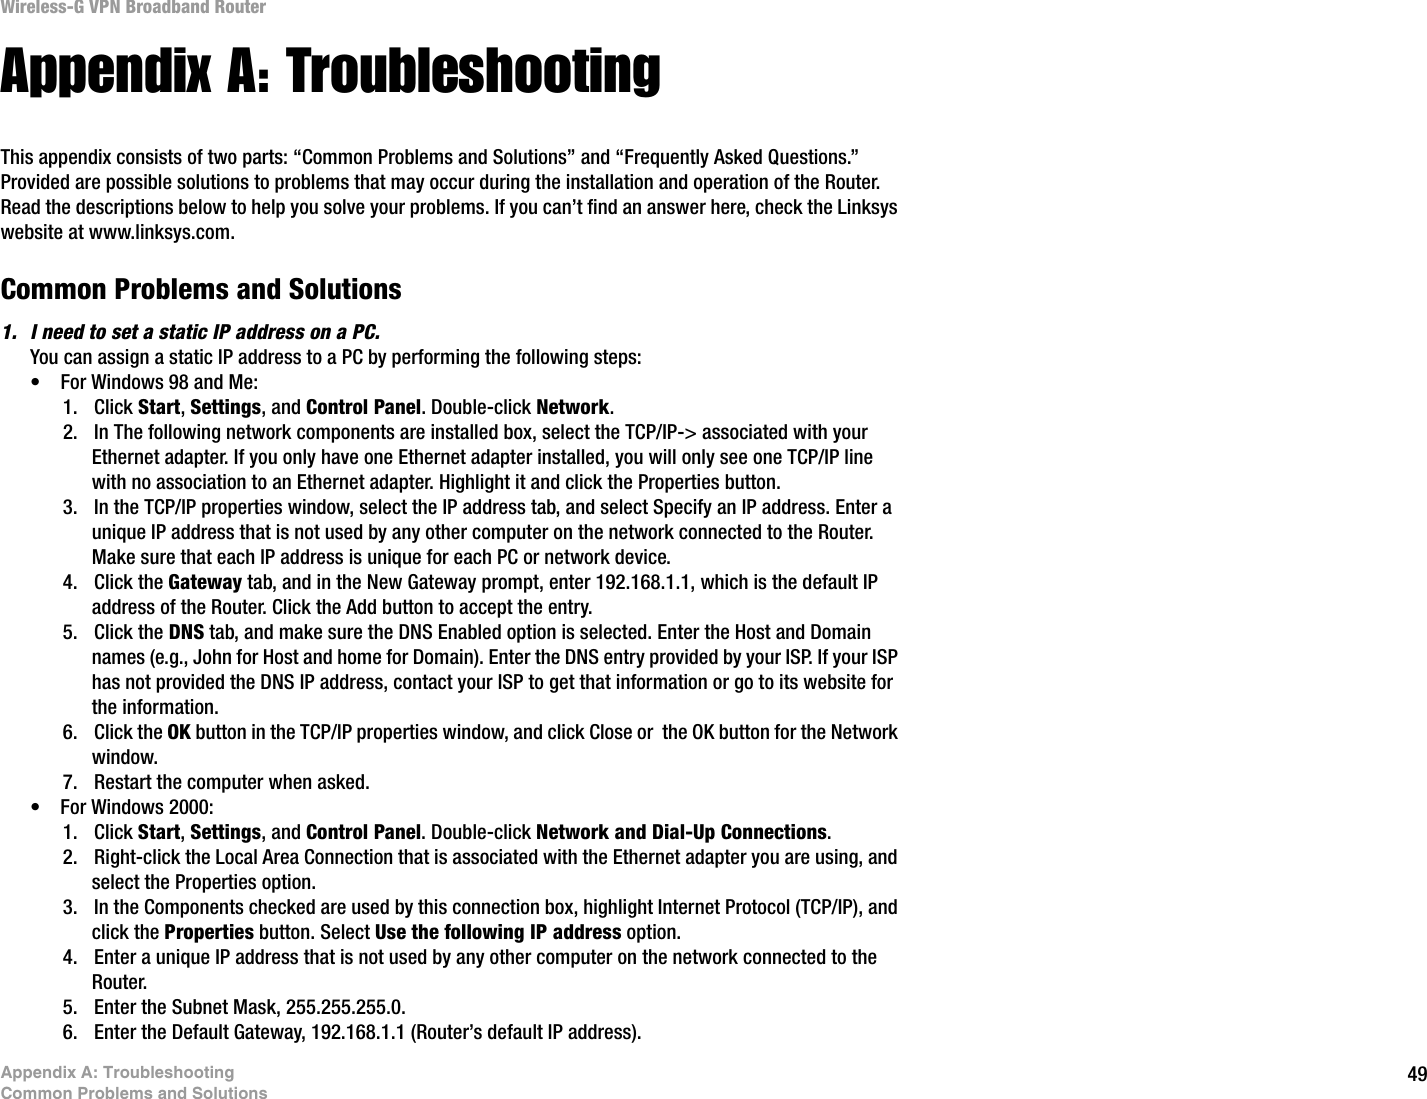 49Appendix A: TroubleshootingCommon Problems and SolutionsWireless-G VPN Broadband RouterAppendix A: TroubleshootingThis appendix consists of two parts: “Common Problems and Solutions” and “Frequently Asked Questions.” Provided are possible solutions to problems that may occur during the installation and operation of the Router. Read the descriptions below to help you solve your problems. If you can’t find an answer here, check the Linksys website at www.linksys.com.Common Problems and Solutions1. I need to set a static IP address on a PC.You can assign a static IP address to a PC by performing the following steps:• For Windows 98 and Me:1. Click Start, Settings, and Control Panel. Double-click Network.2. In The following network components are installed box, select the TCP/IP-&gt; associated with your Ethernet adapter. If you only have one Ethernet adapter installed, you will only see one TCP/IP line with no association to an Ethernet adapter. Highlight it and click the Properties button.3. In the TCP/IP properties window, select the IP address tab, and select Specify an IP address. Enter a unique IP address that is not used by any other computer on the network connected to the Router. Make sure that each IP address is unique for each PC or network device.4. Click the Gateway tab, and in the New Gateway prompt, enter 192.168.1.1, which is the default IP address of the Router. Click the Add button to accept the entry.5. Click the DNS tab, and make sure the DNS Enabled option is selected. Enter the Host and Domain names (e.g., John for Host and home for Domain). Enter the DNS entry provided by your ISP. If your ISP has not provided the DNS IP address, contact your ISP to get that information or go to its website for the information.6. Click the OK button in the TCP/IP properties window, and click Close or  the OK button for the Network window.7. Restart the computer when asked.• For Windows 2000:1. Click Start, Settings, and Control Panel. Double-click Network and Dial-Up Connections.2. Right-click the Local Area Connection that is associated with the Ethernet adapter you are using, and select the Properties option.3. In the Components checked are used by this connection box, highlight Internet Protocol (TCP/IP), and click the Properties button. Select Use the following IP address option.4. Enter a unique IP address that is not used by any other computer on the network connected to the Router. 5. Enter the Subnet Mask, 255.255.255.0.6. Enter the Default Gateway, 192.168.1.1 (Router’s default IP address). 